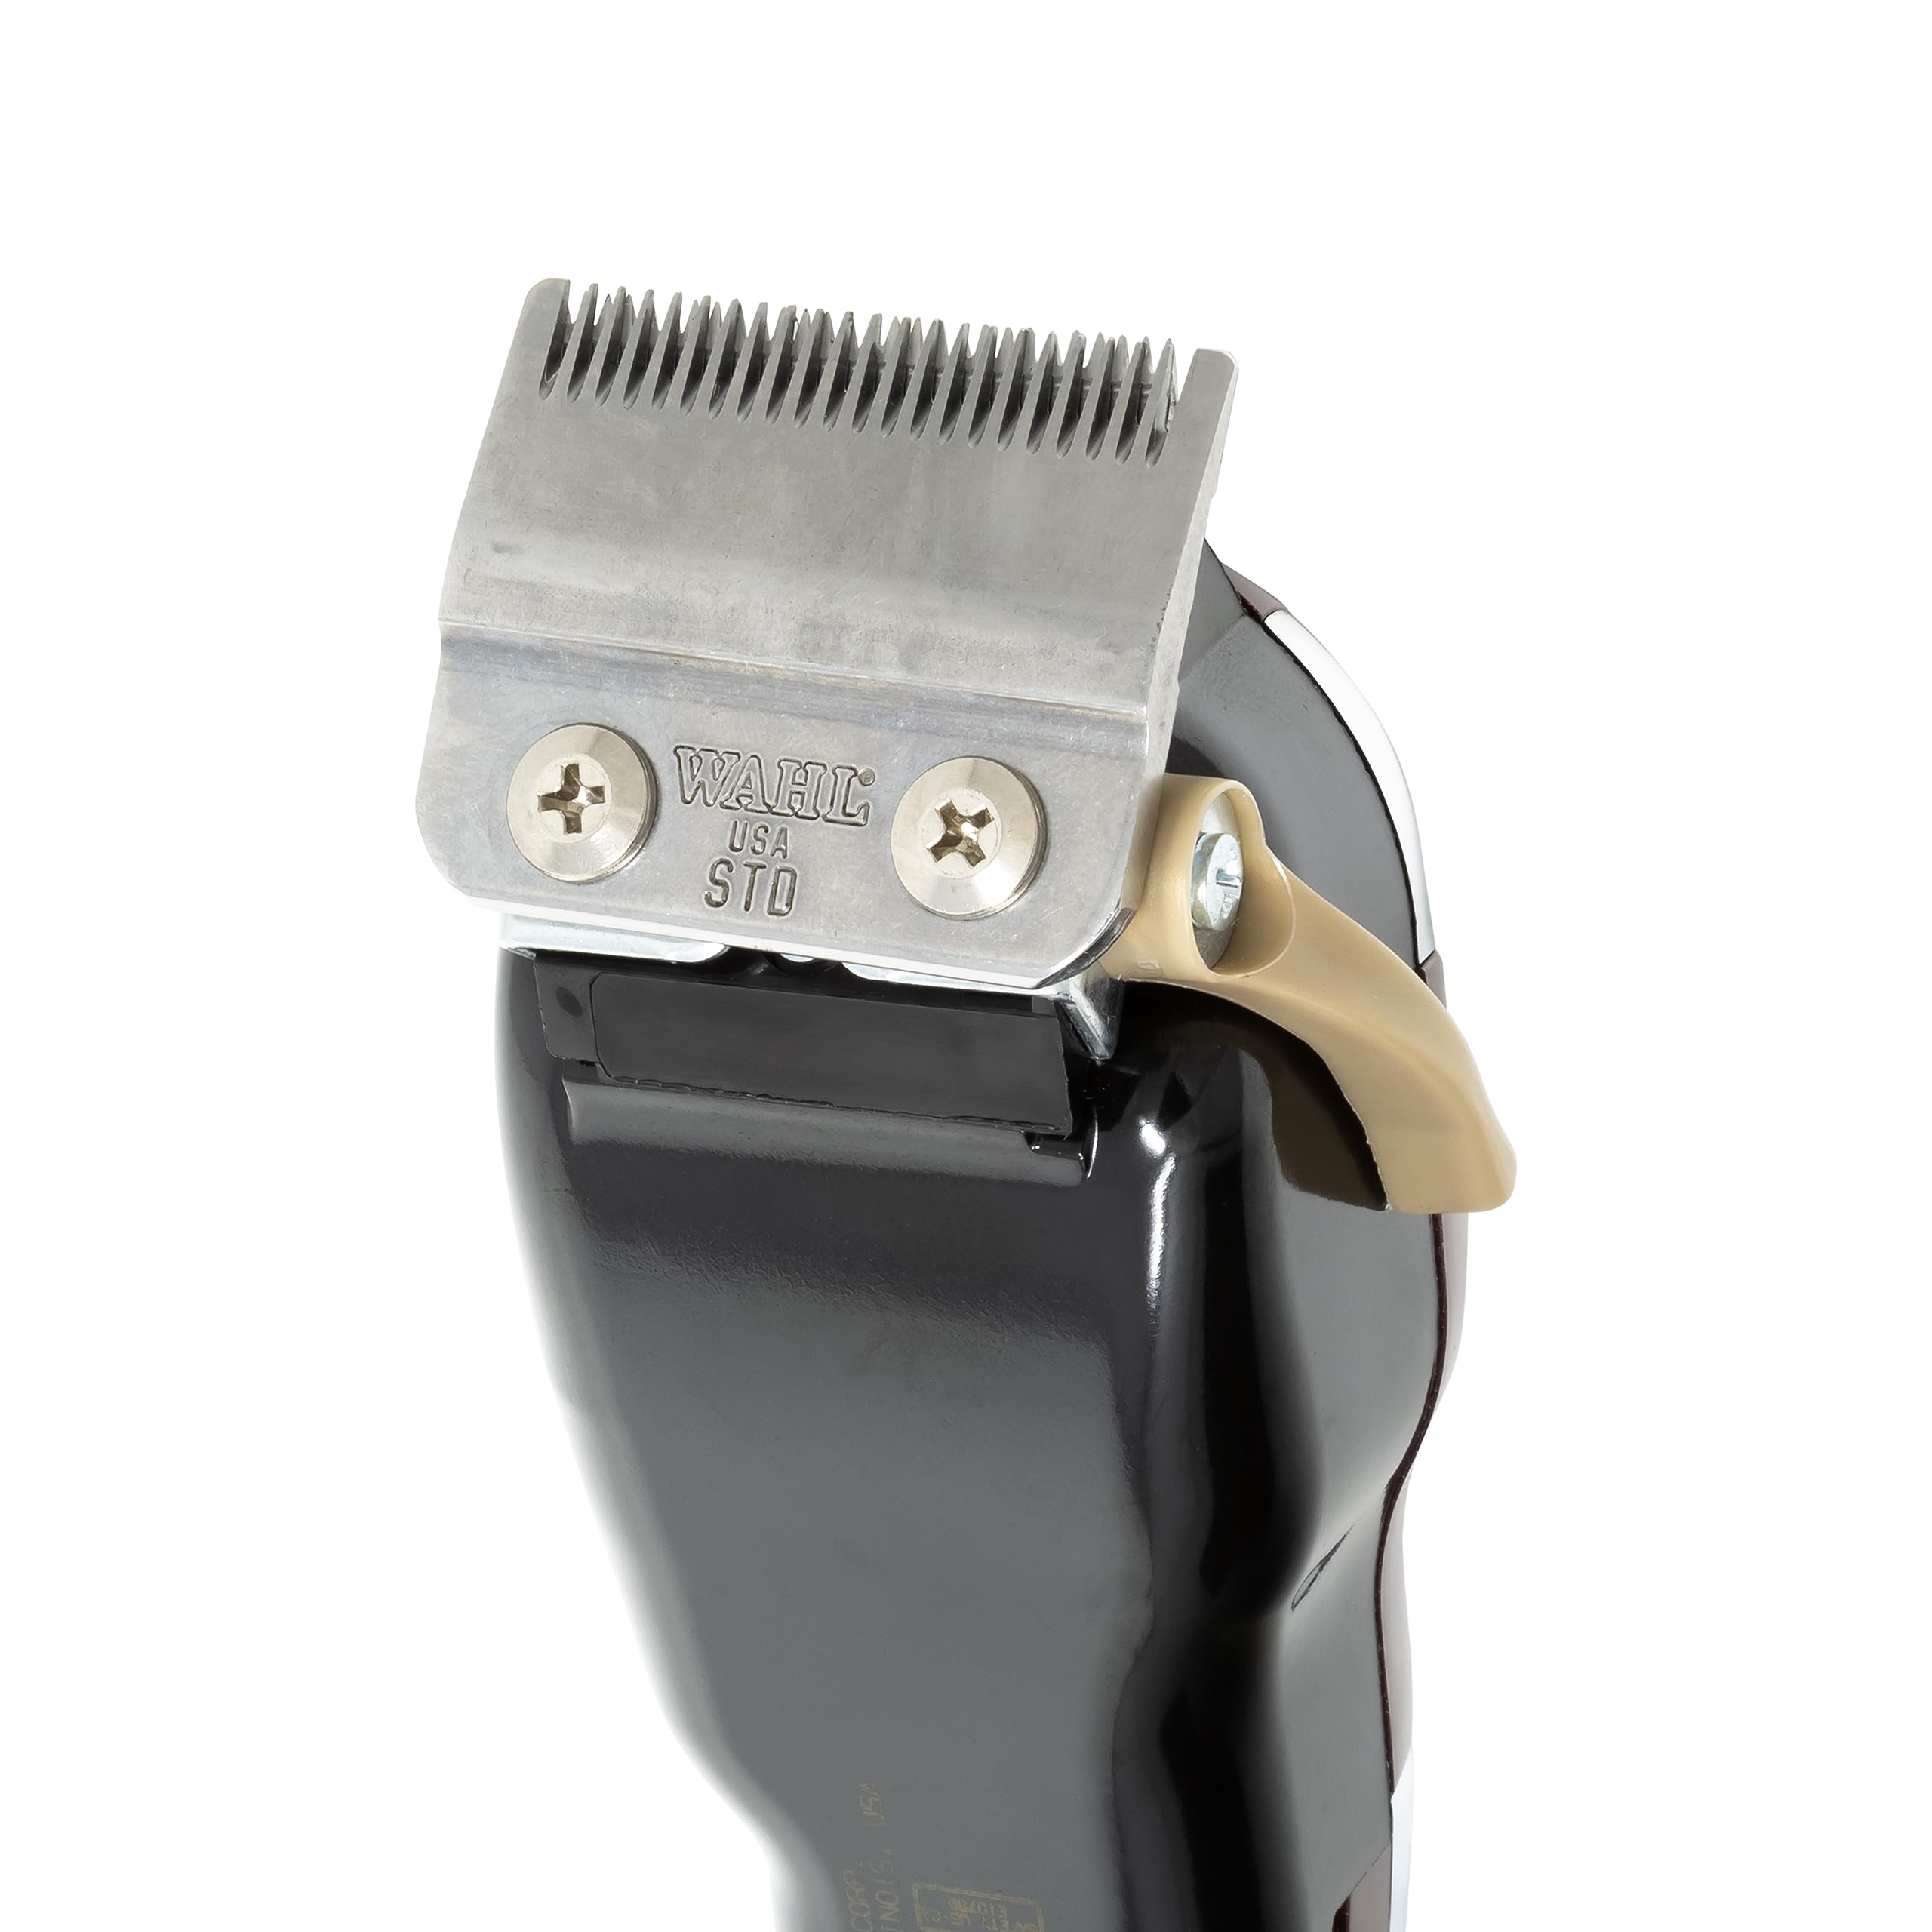 Wahl Professional 5 Star Magic Clip Precision Fade Clipper with Zero Overlap Blades, Variable Taper Lever, and Texture Settings for Professional Barbers and Stylists - Model 8451